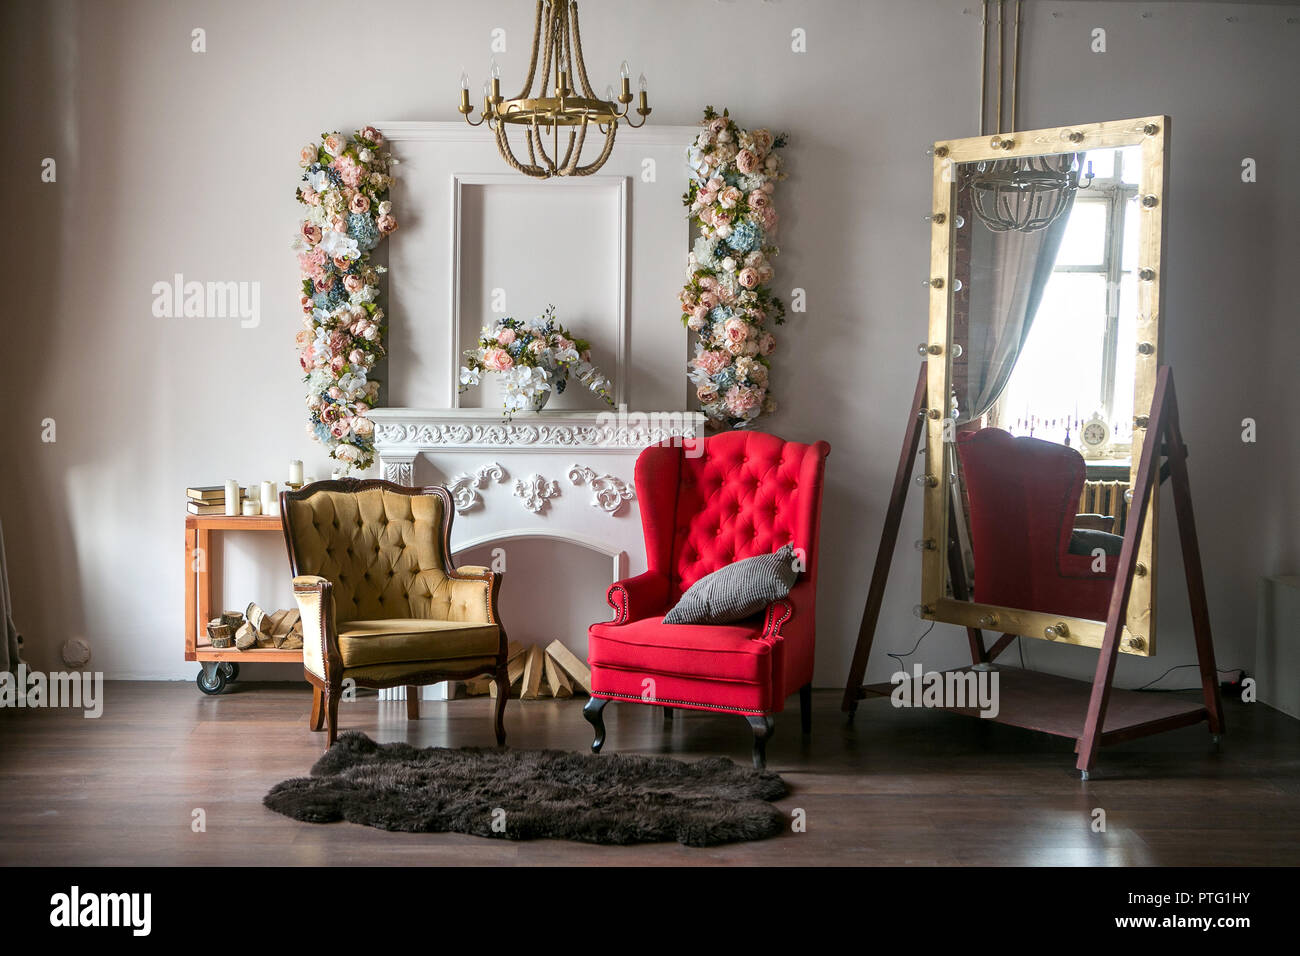 bright loft-style room with a red armchair, a brown armchair, a white fireplace with flowers, a large mirror with light bulbs and a chandelier Stock Photo